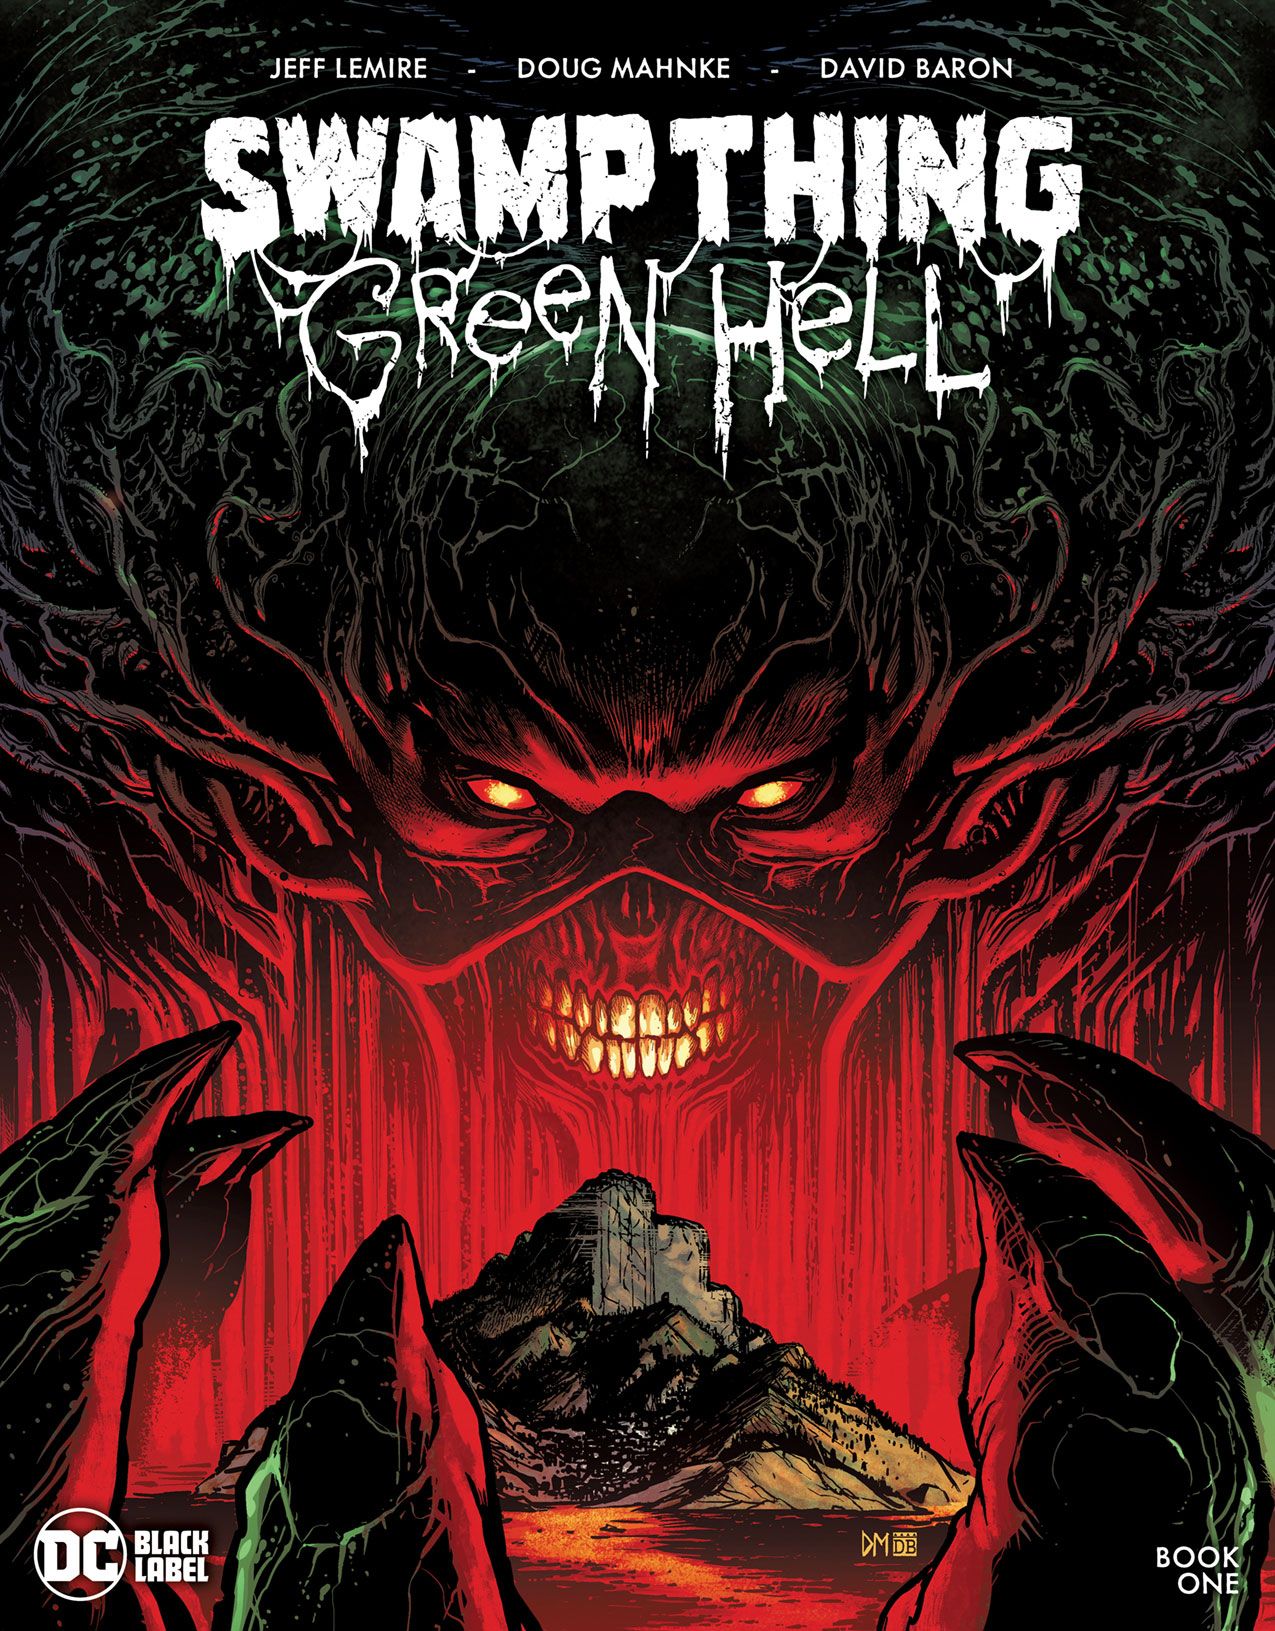 Cover to the DC Comics Black Label series Swamp Thing Green Hell 1 by Doug Mahnke